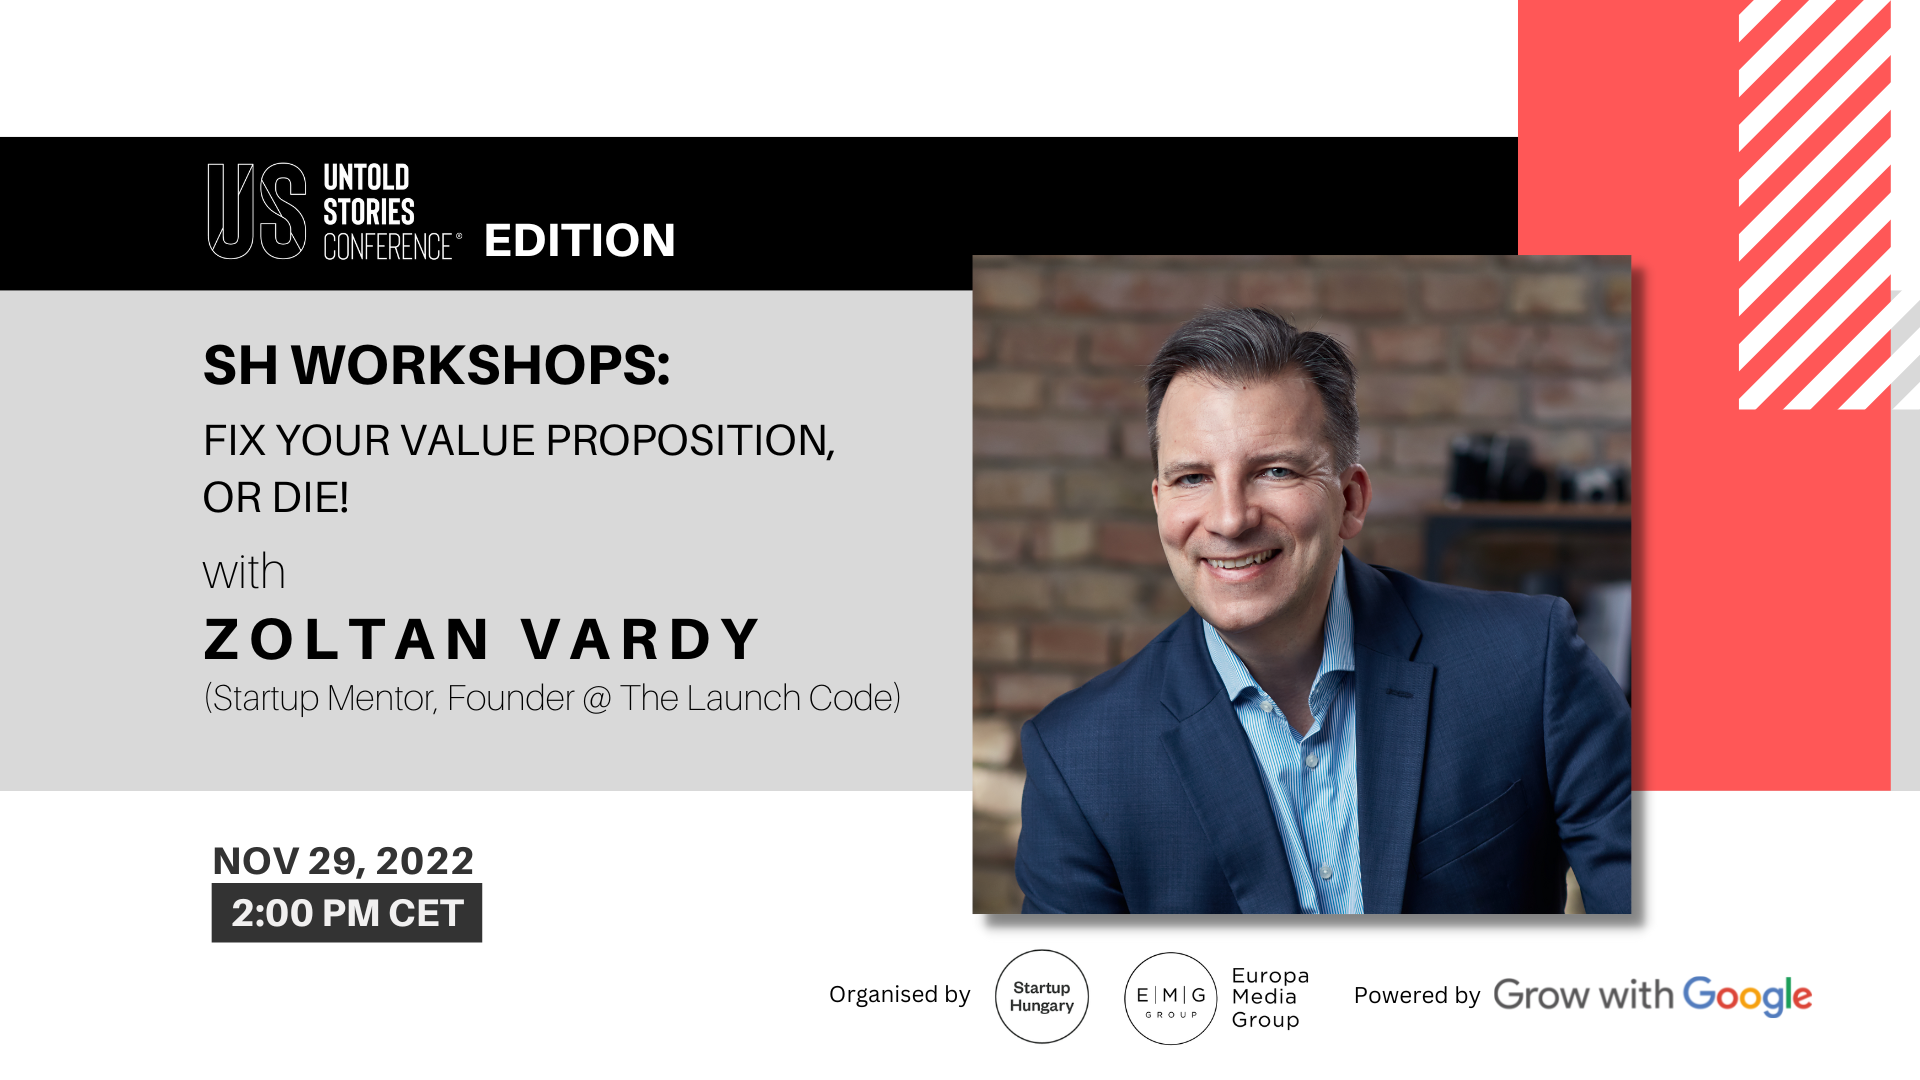 Get the most out of Untold! Master your value proposition at Zoltán Várdy's Workshop!